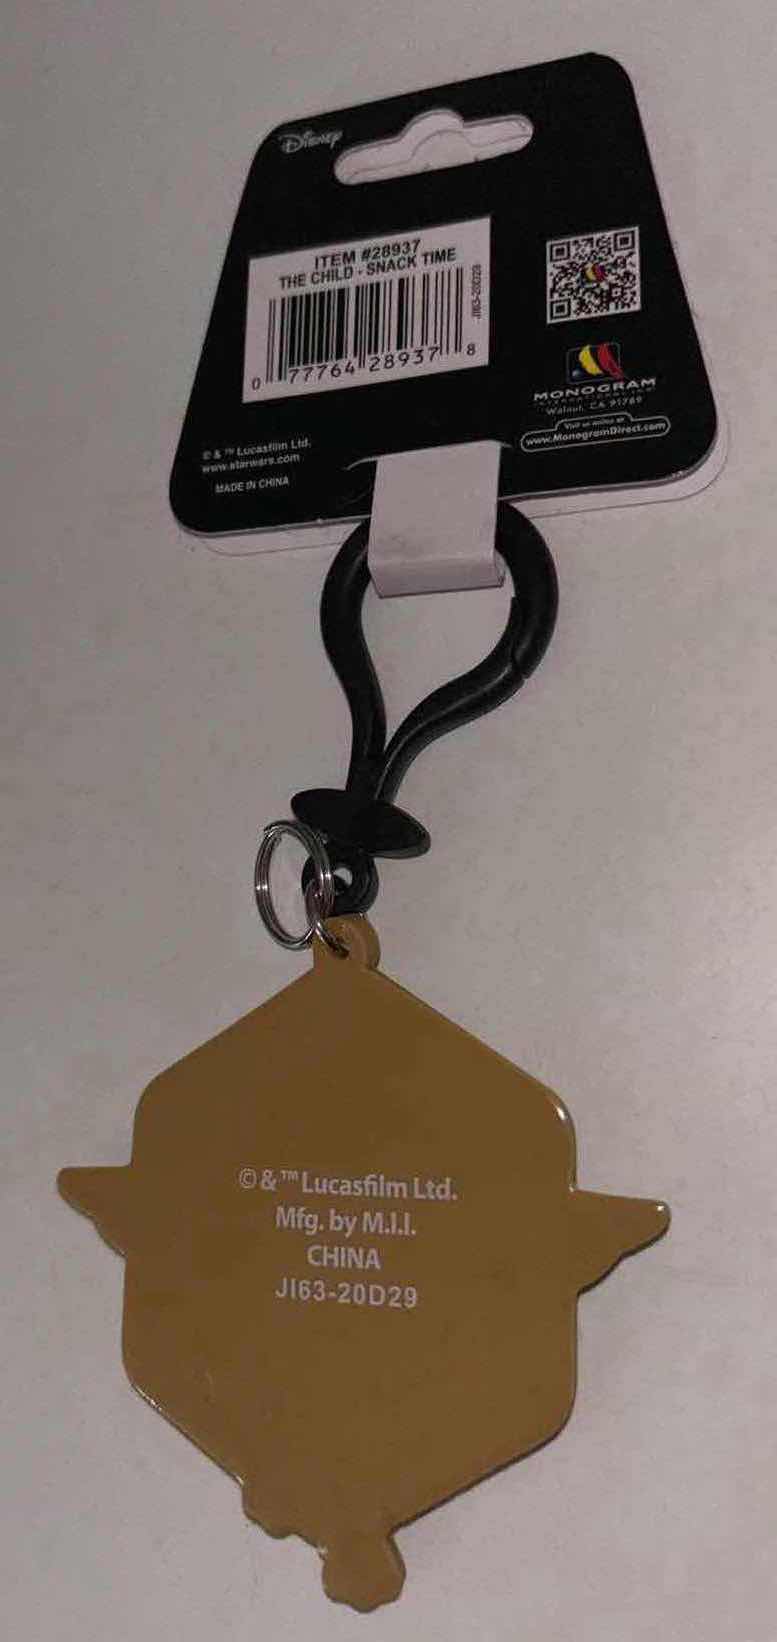 Photo 5 of NEW FUNKO MYSTERY MINIS BOBBLE-HEAD FIGURINE, STAR WARS THE MANDALORIAN & MONOGRAM DISNEY SOFT TOUCH BAG CLIP THE CHILD “SNACK TIME”